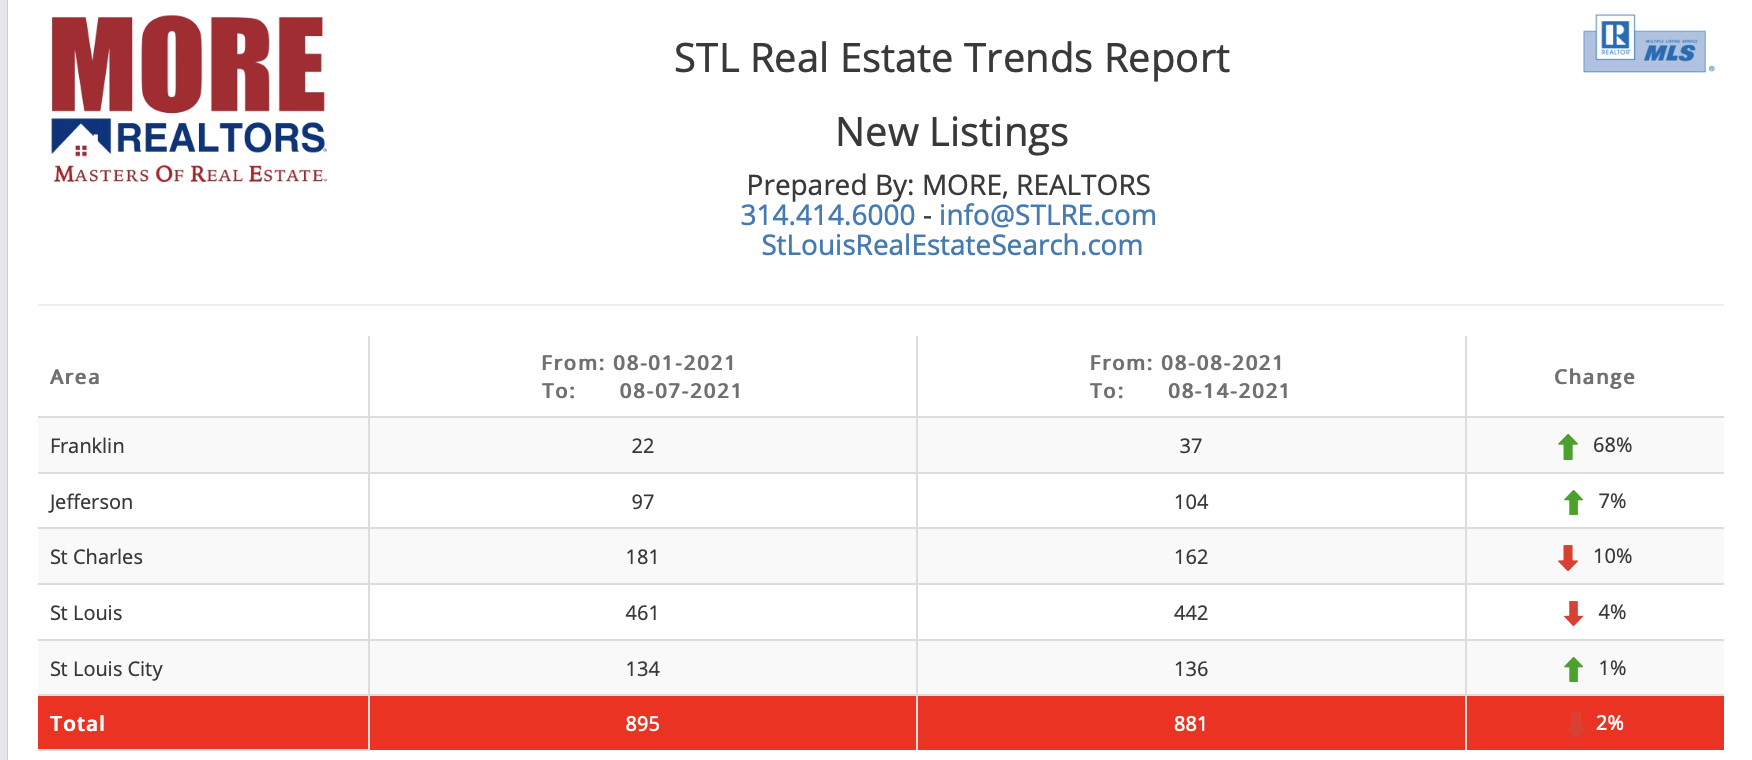 STL Real Estate Trends Report - New Listings